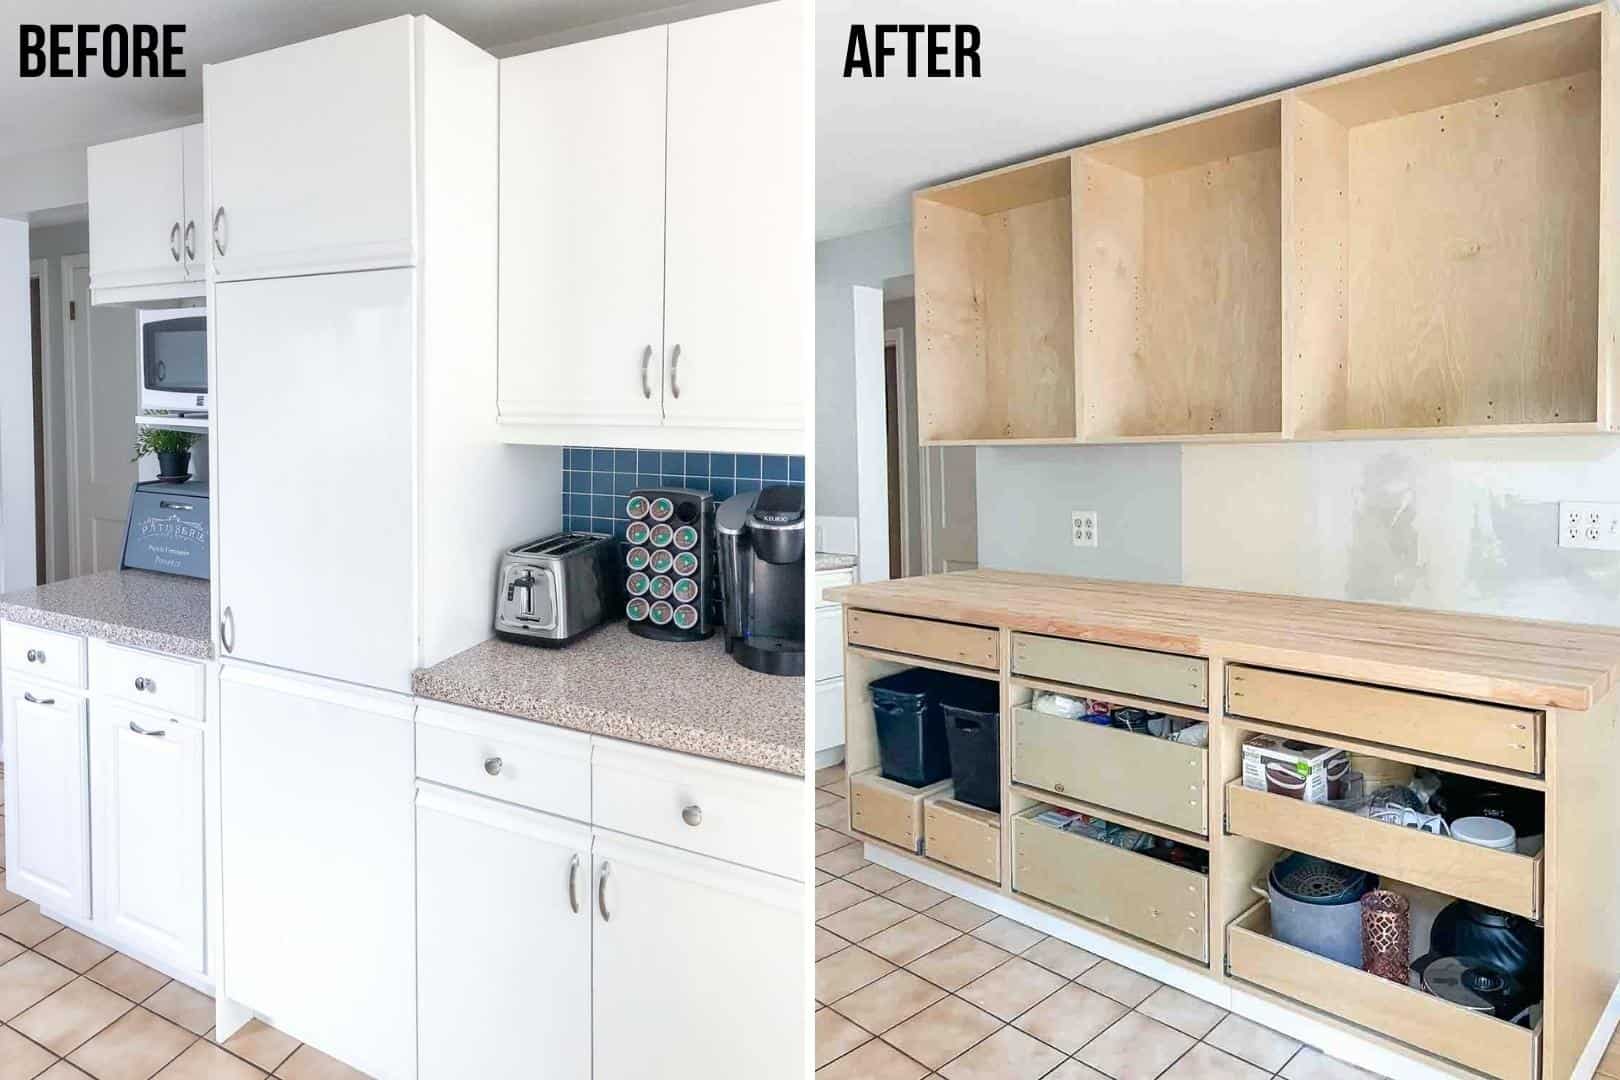 Benefits of Installing Upper Cabinets First